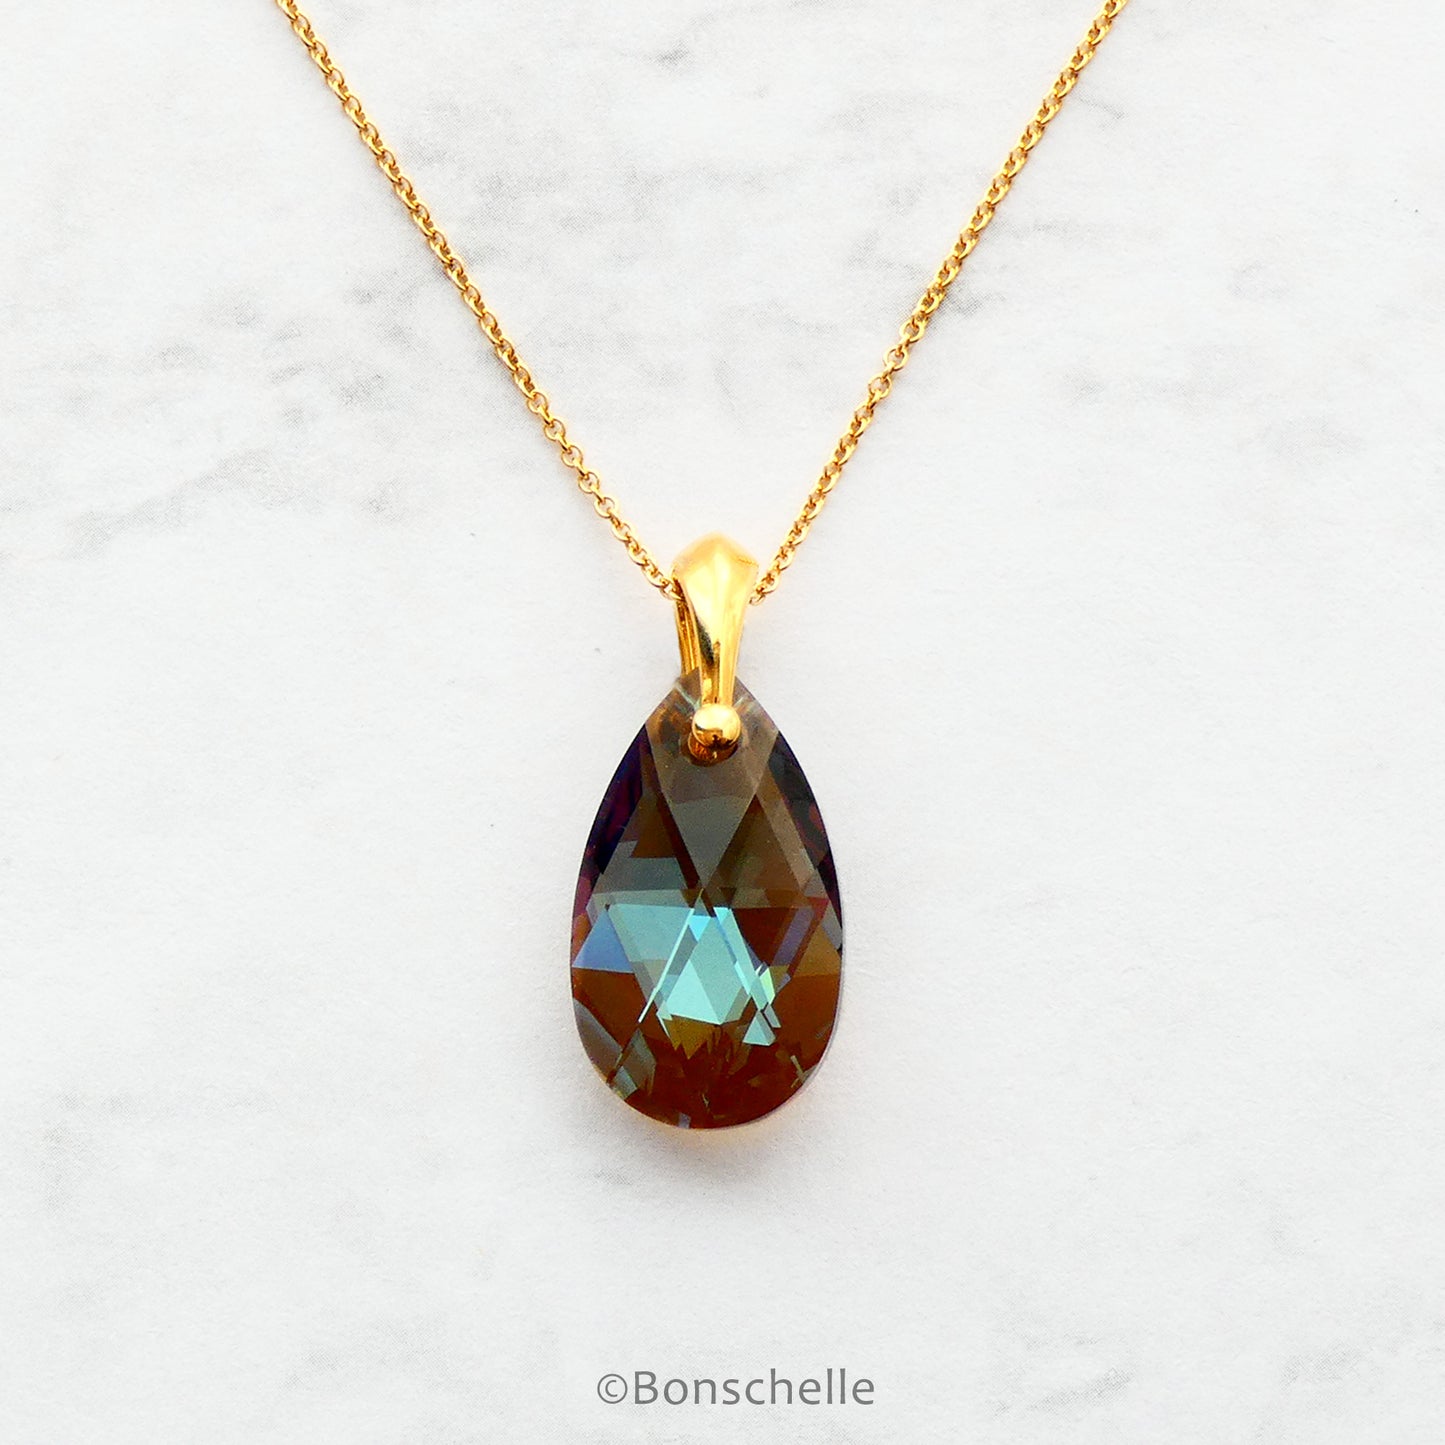 Handmade necklace with a teardrop shape bronze toned cut glass crystal bead and 14K gold filled chain